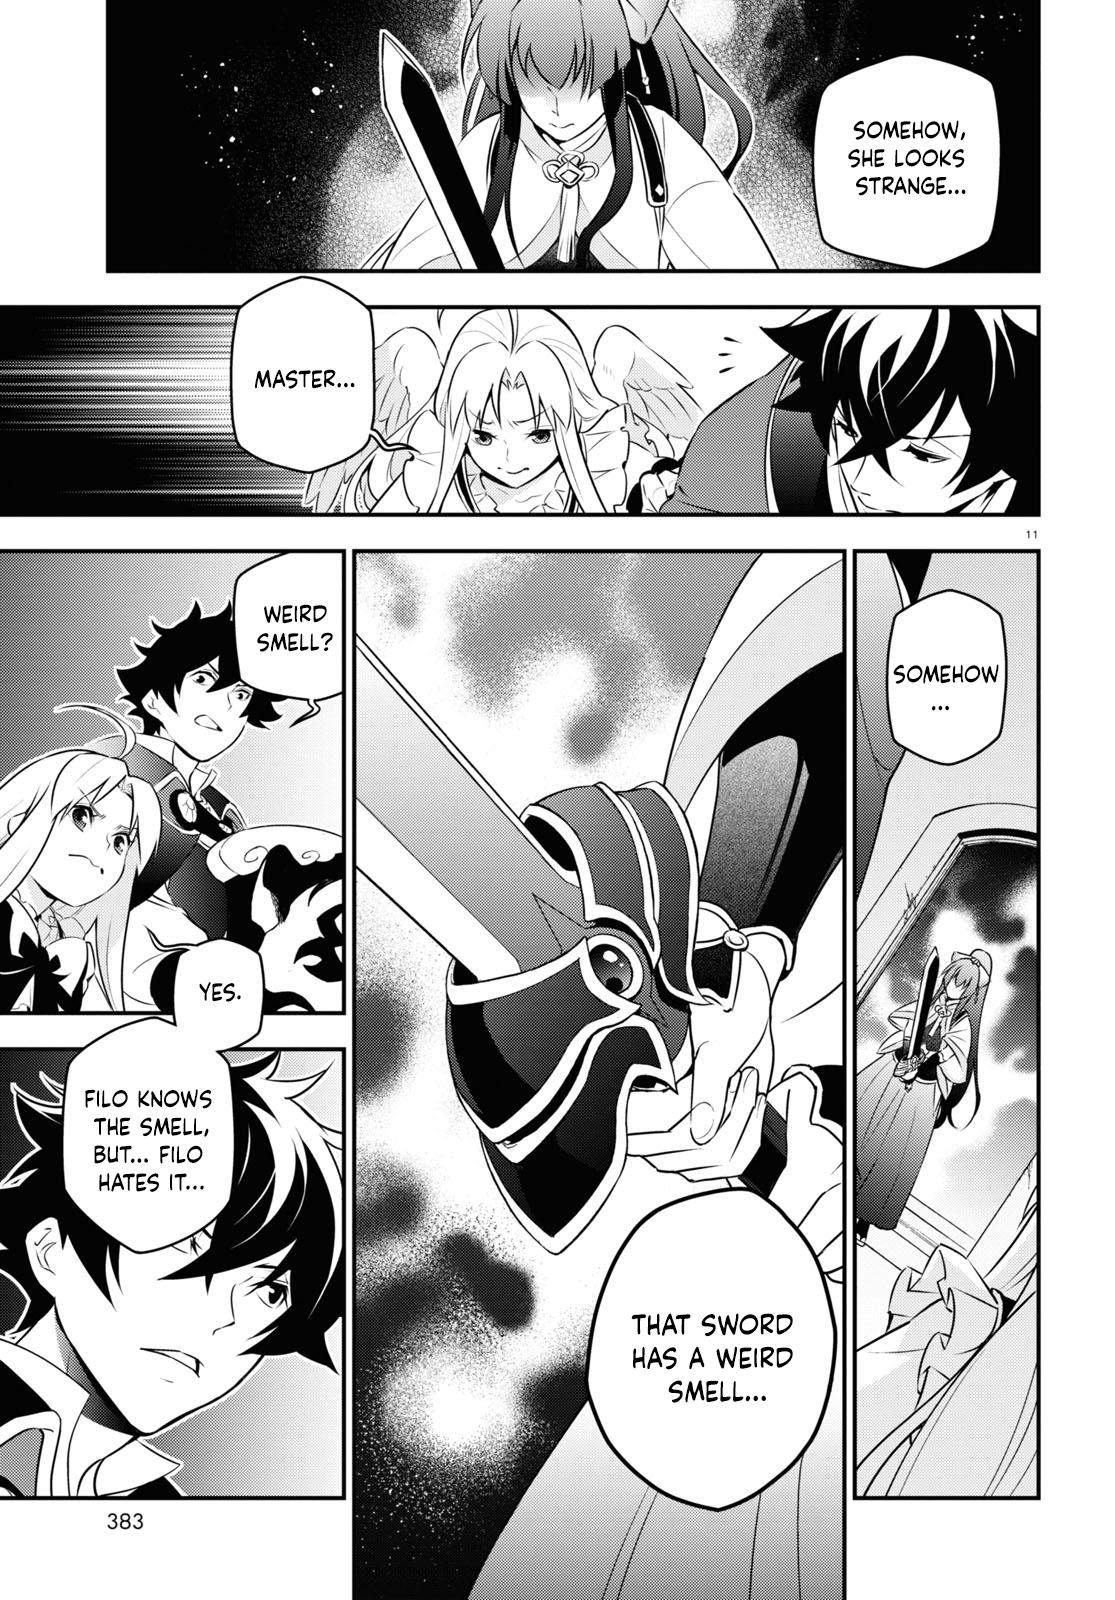 The Rising Of The Shield Hero Chapter 78, The Rising Of The Shield Hero 78, Read The Rising Of The Shield Hero Chapter 78, The Rising Of The Shield Hero Chapter 78 Manga, The Rising Of The Shield Hero Chapter 78 english, The Rising Of The Shield Hero Chapter 78 raw manga, The Rising Of The Shield Hero Chapter 78 online, The Rising Of The Shield Hero Chapter 78 high quality, The Rising Of The Shield Hero 78 chapter, The Rising Of The Shield Hero Chapter 78 manga scan